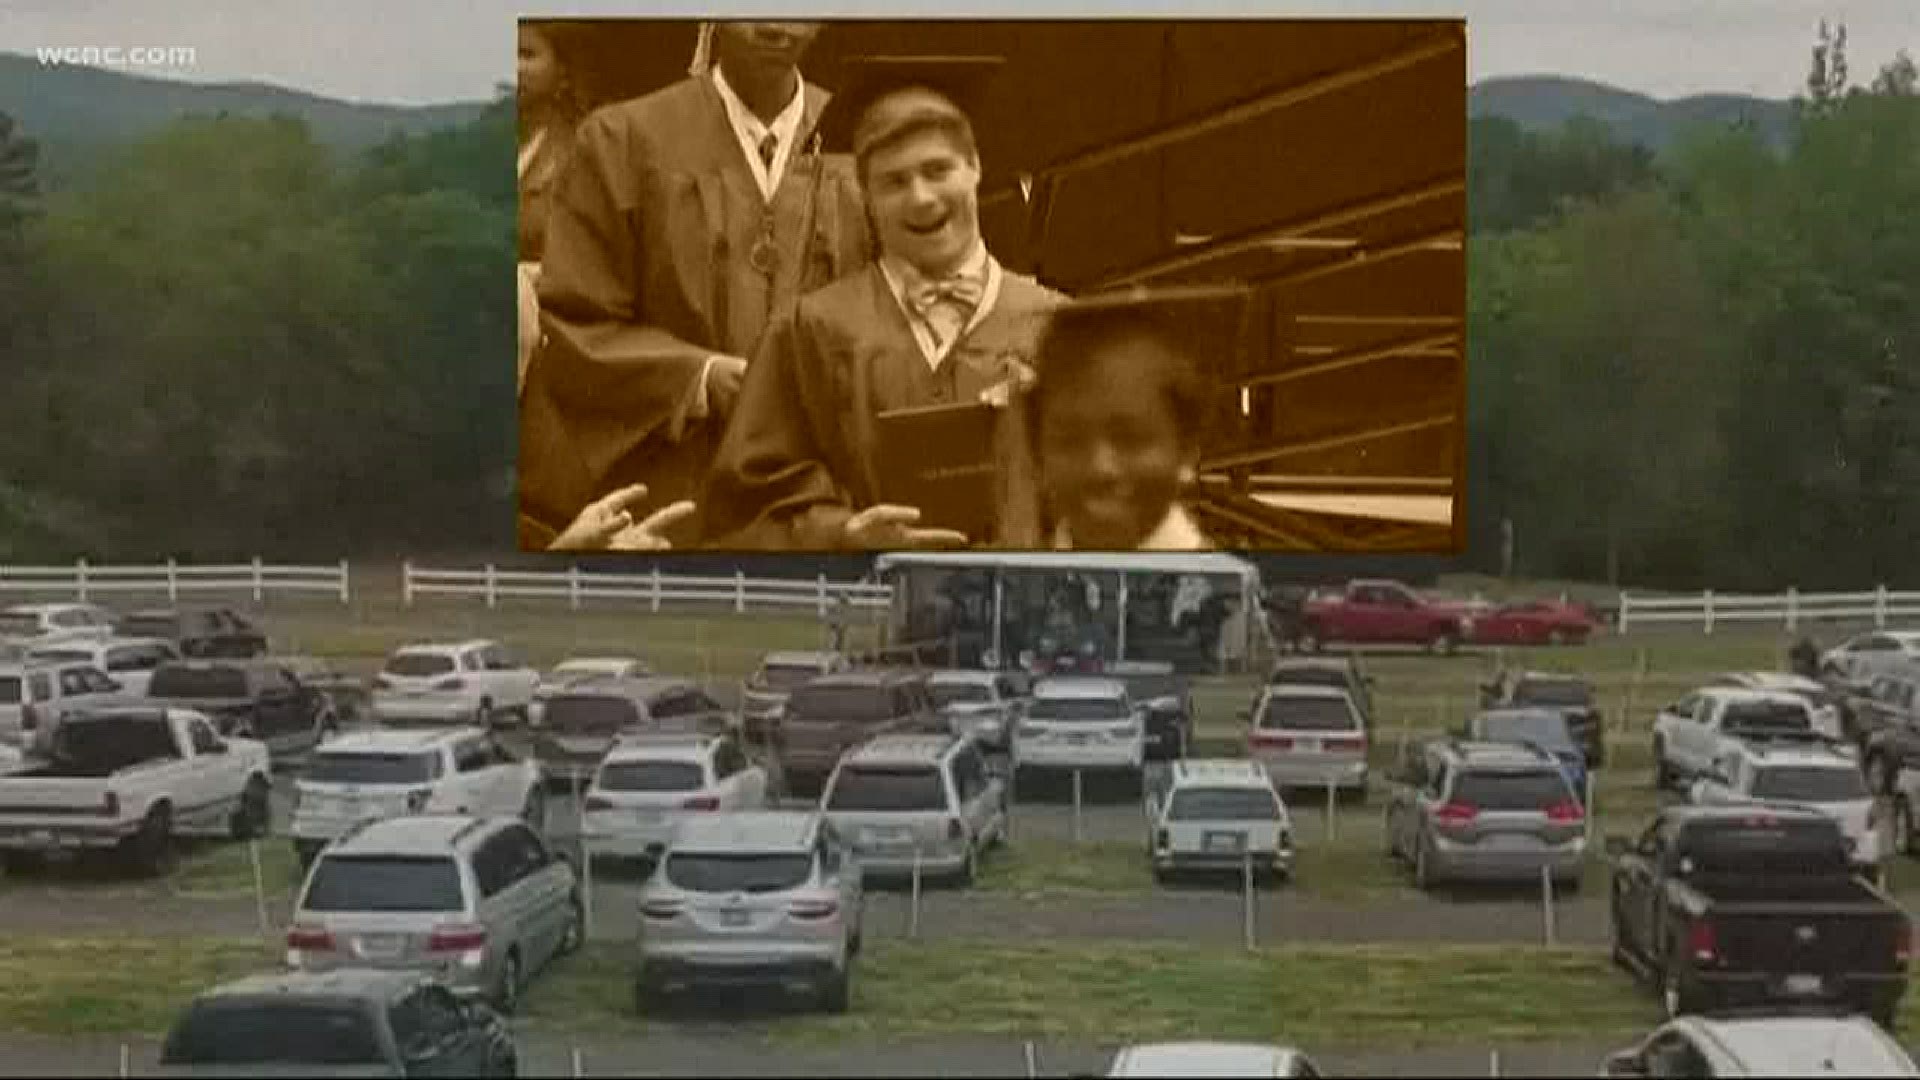 This school district is getting creative with social distancing as they plan to have a graduation ceremony on the big screen, drive-in style.